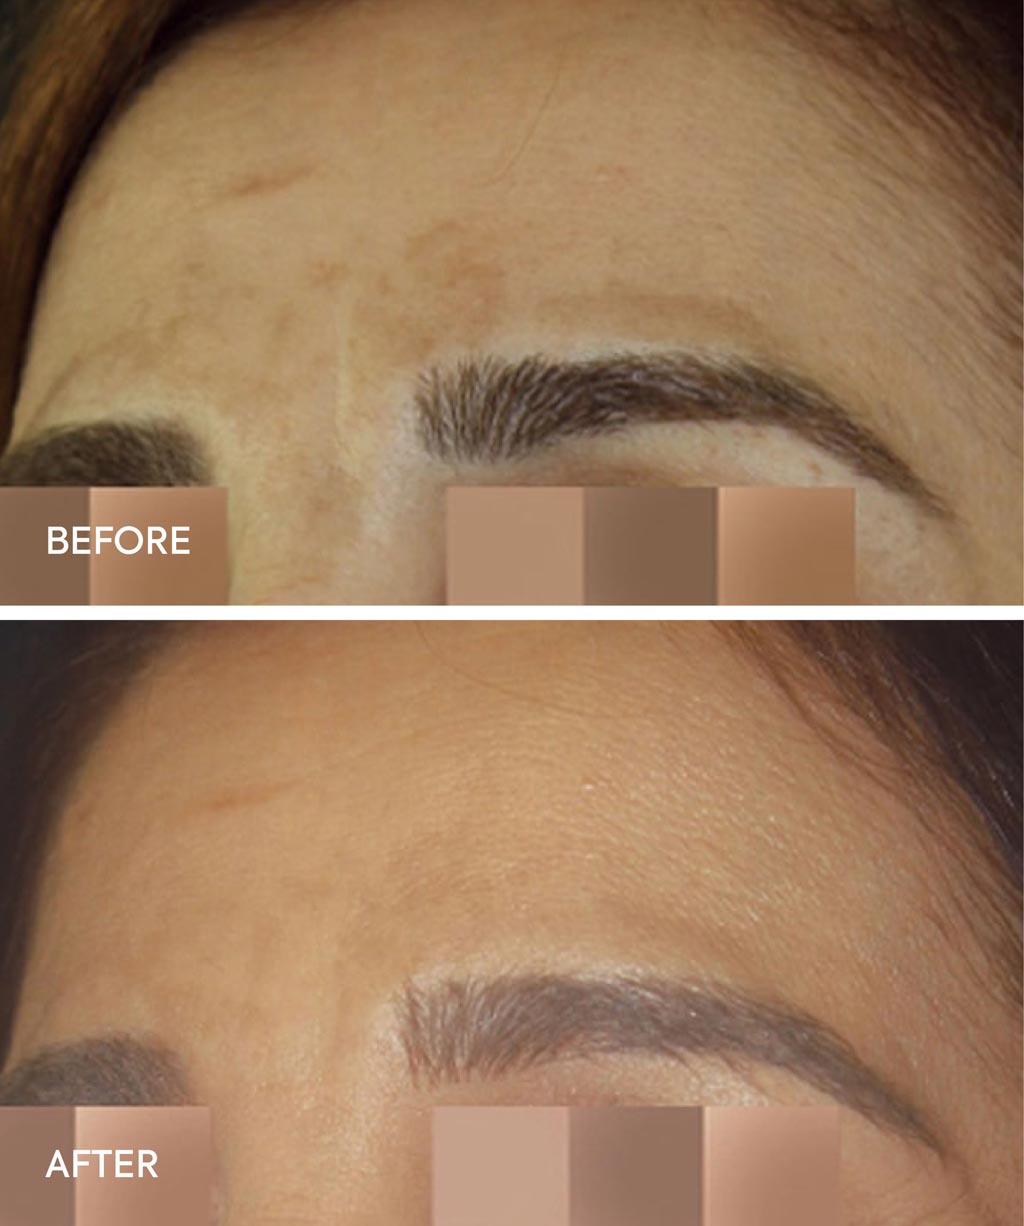 Cosmelan Treatment before and after images - 1